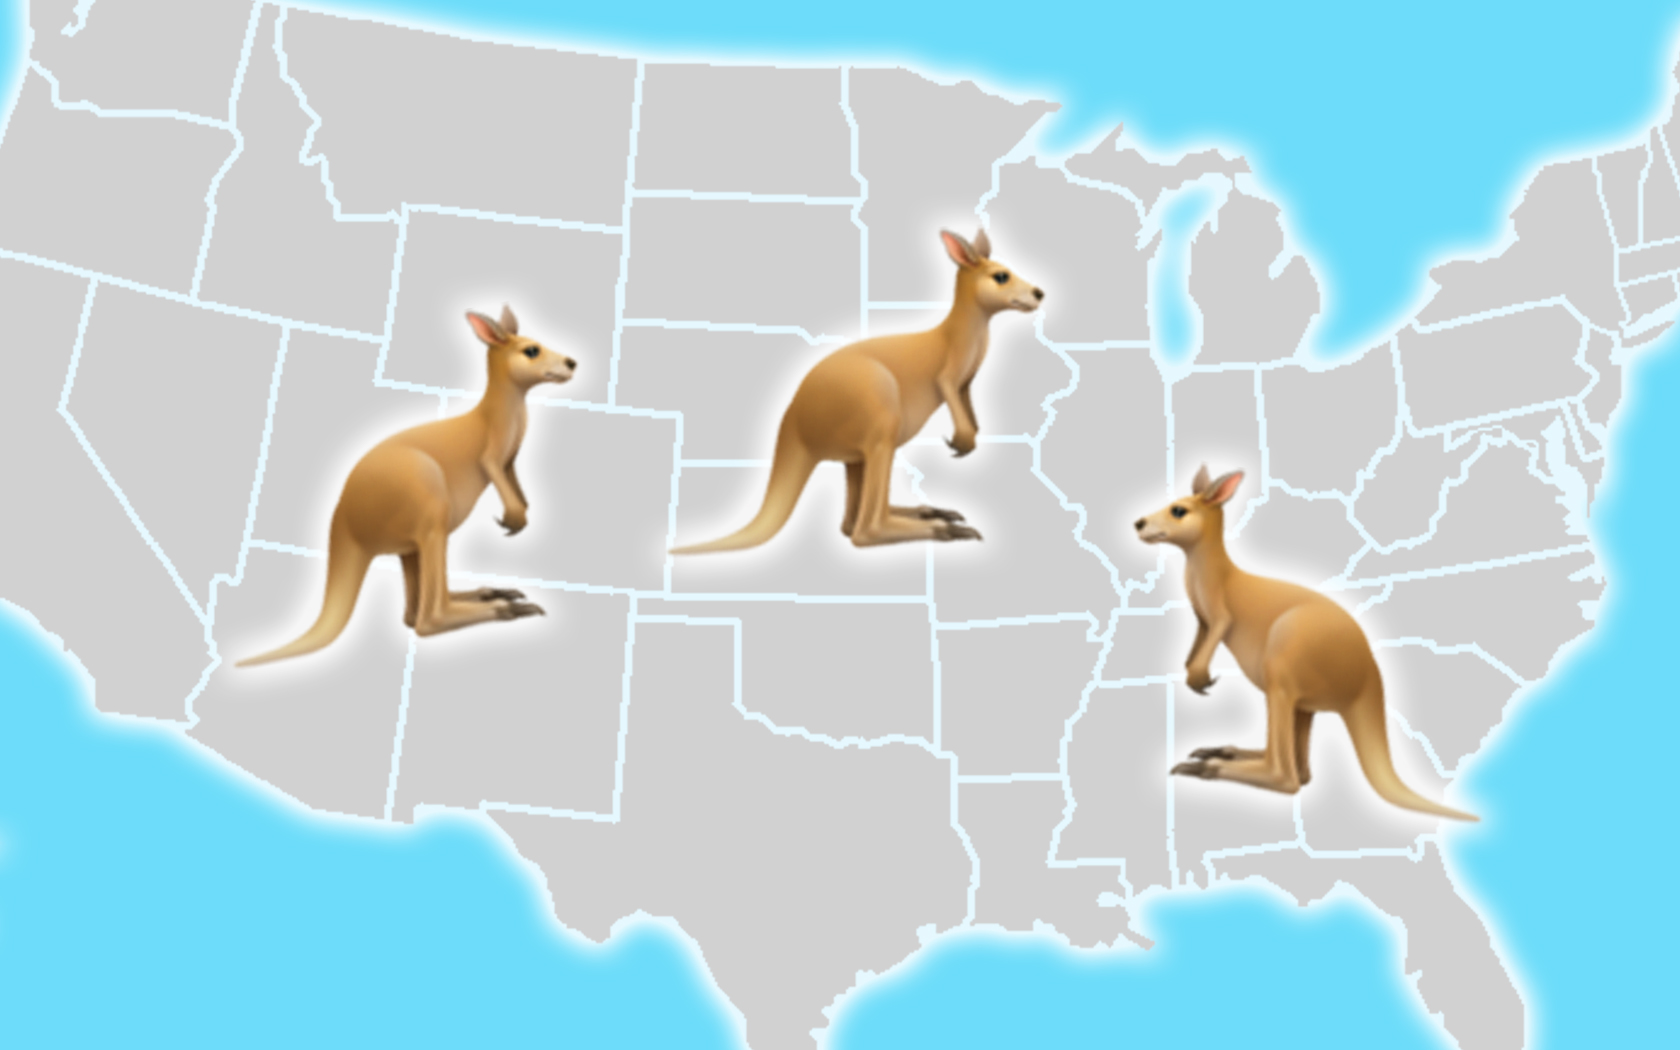 Can You Own A Kangaroo As A Pet? You Sure Can In These US States